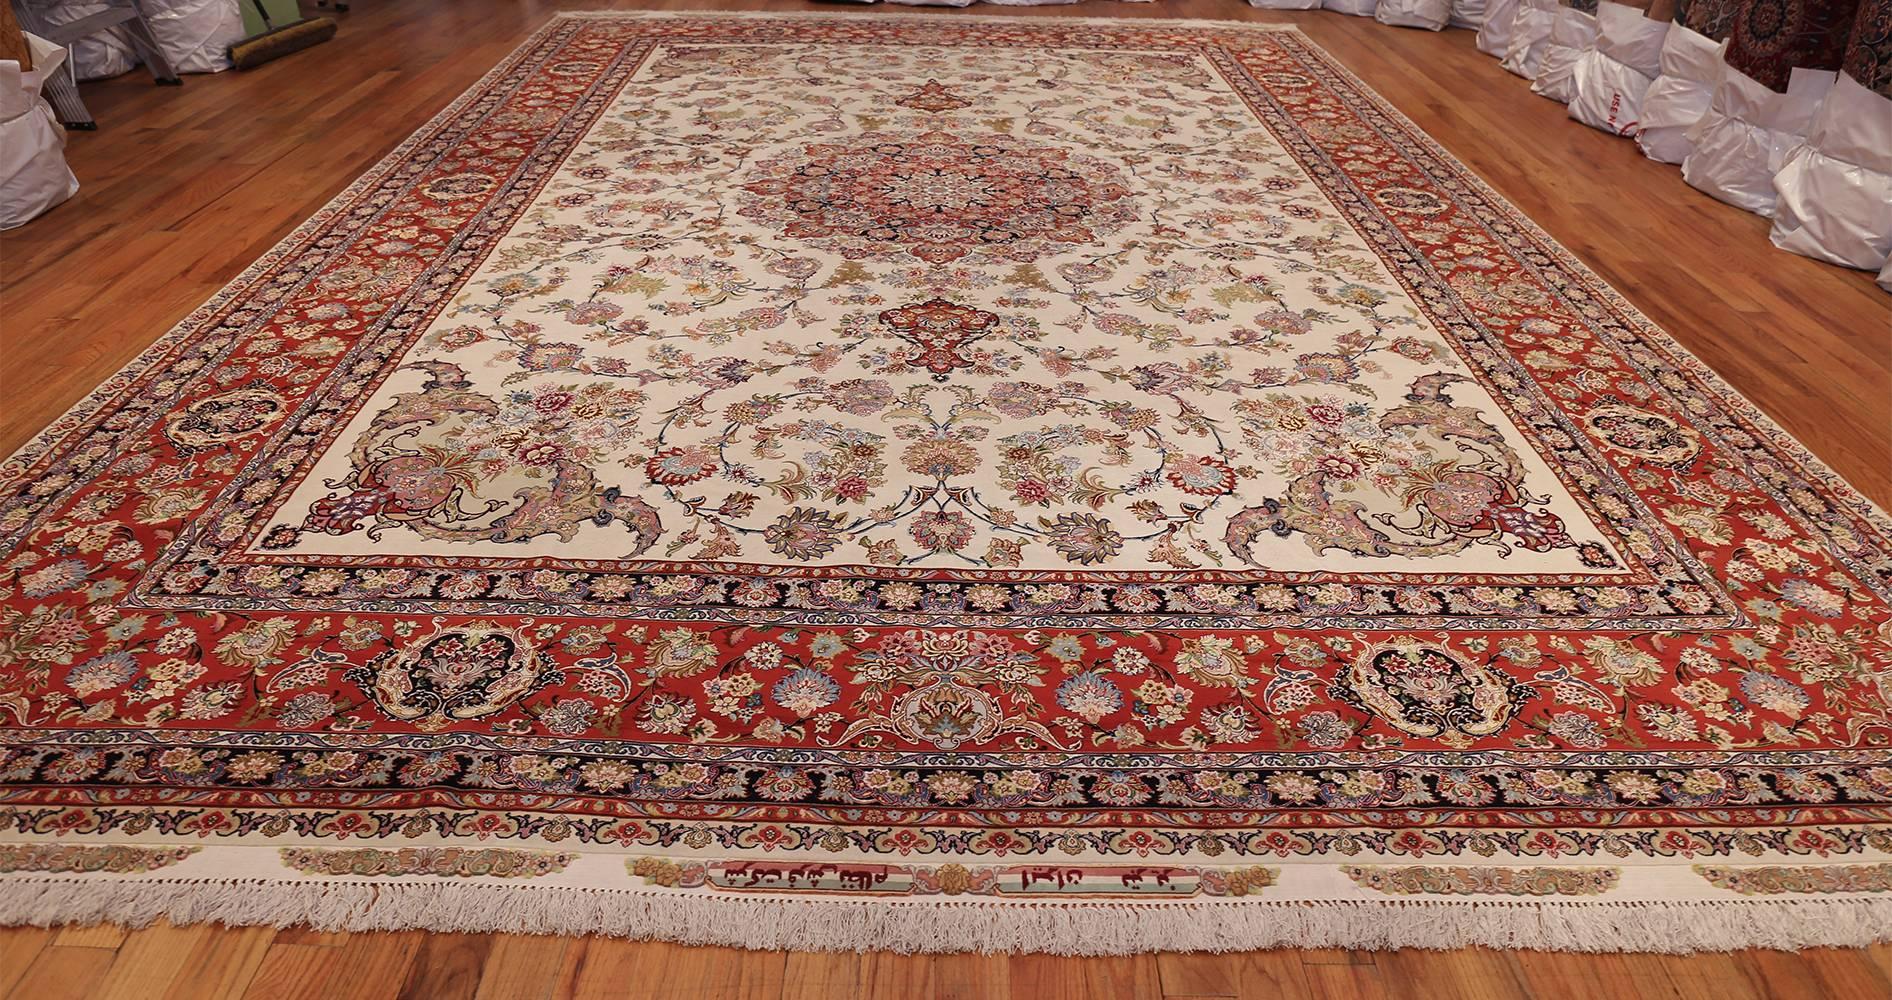 Large Silk and Wool Vintage Tabriz Persian Rug. Size: 11 ft 7 in x 16 ft 10 in  1